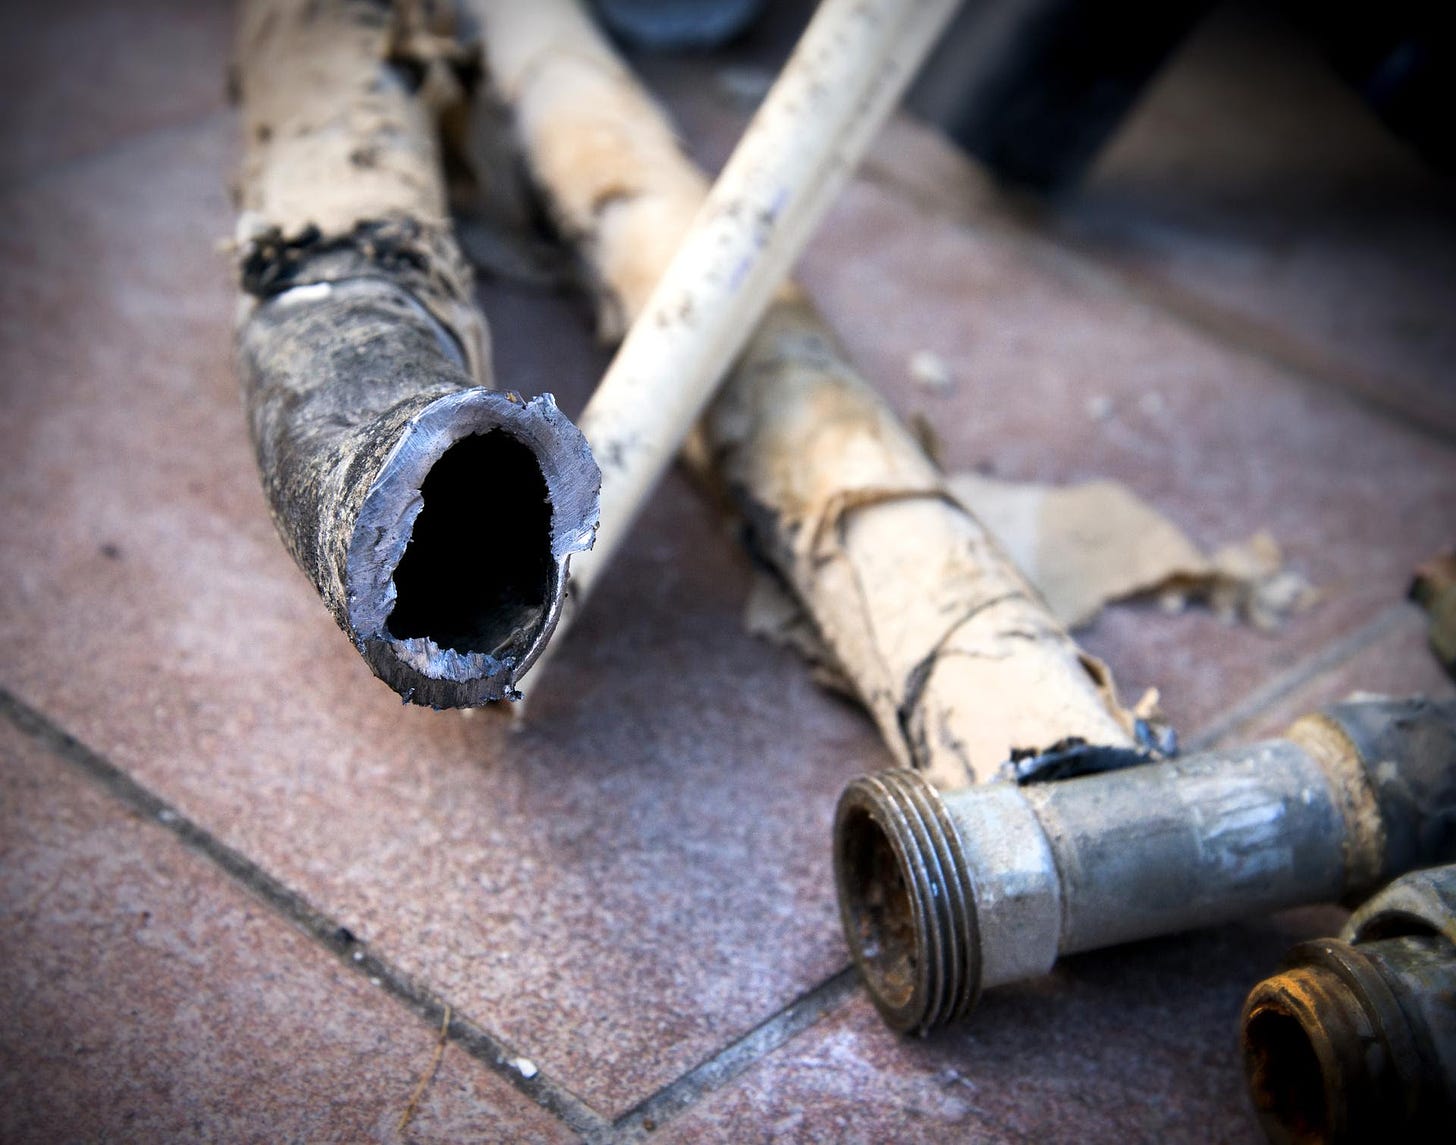 Lead pipes, broken open to show their toxic interiors, lay on a tiled surface.